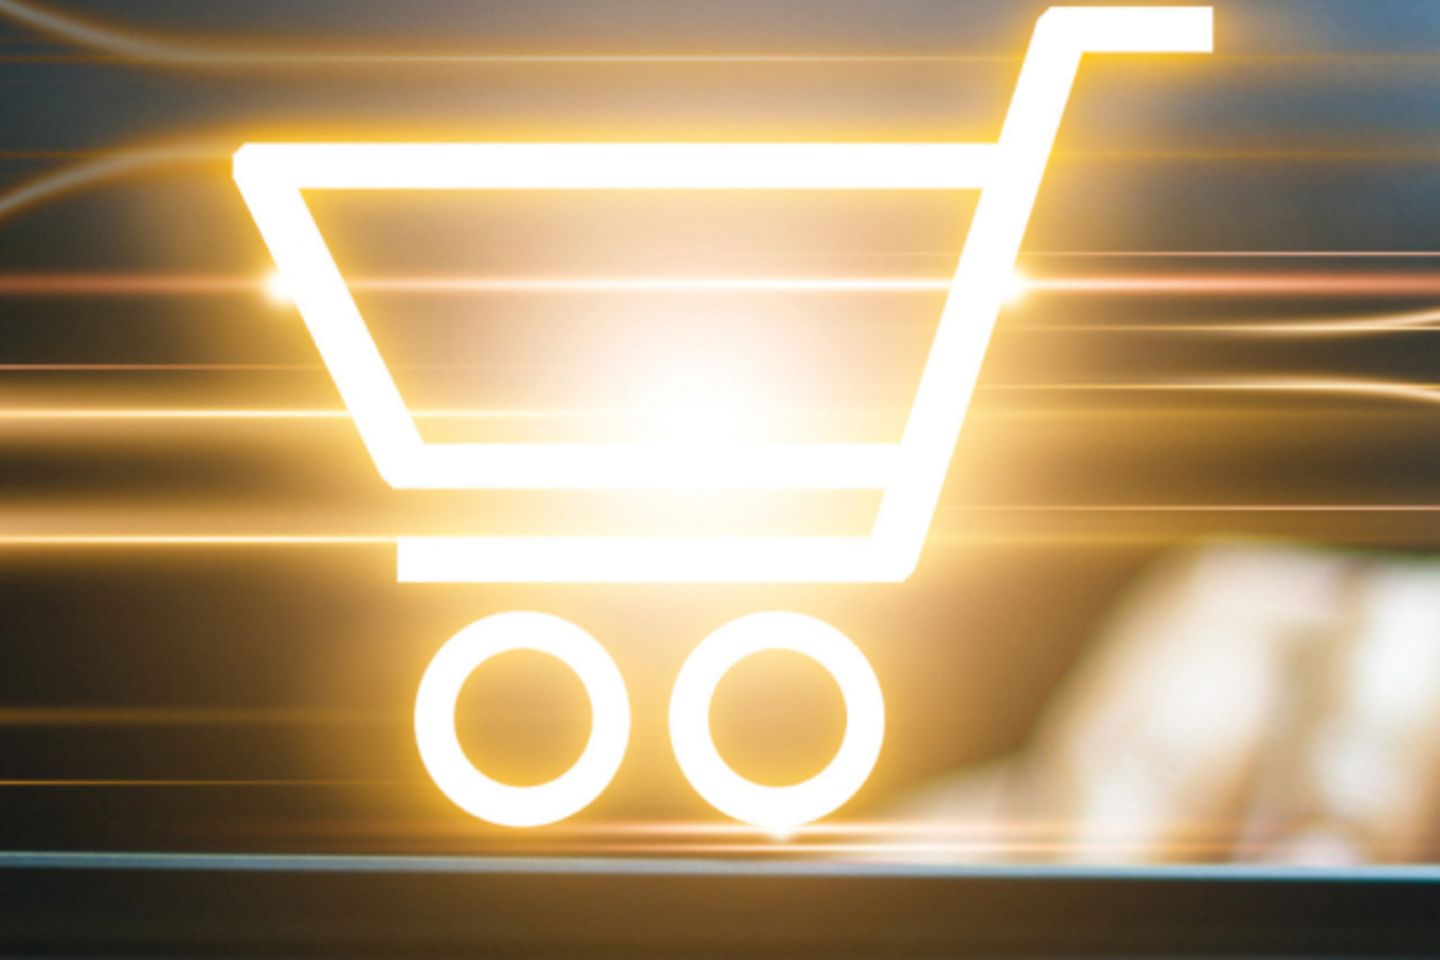 Hands on a tablet with glowing shopping cart icon. More icons and bright lines in the background